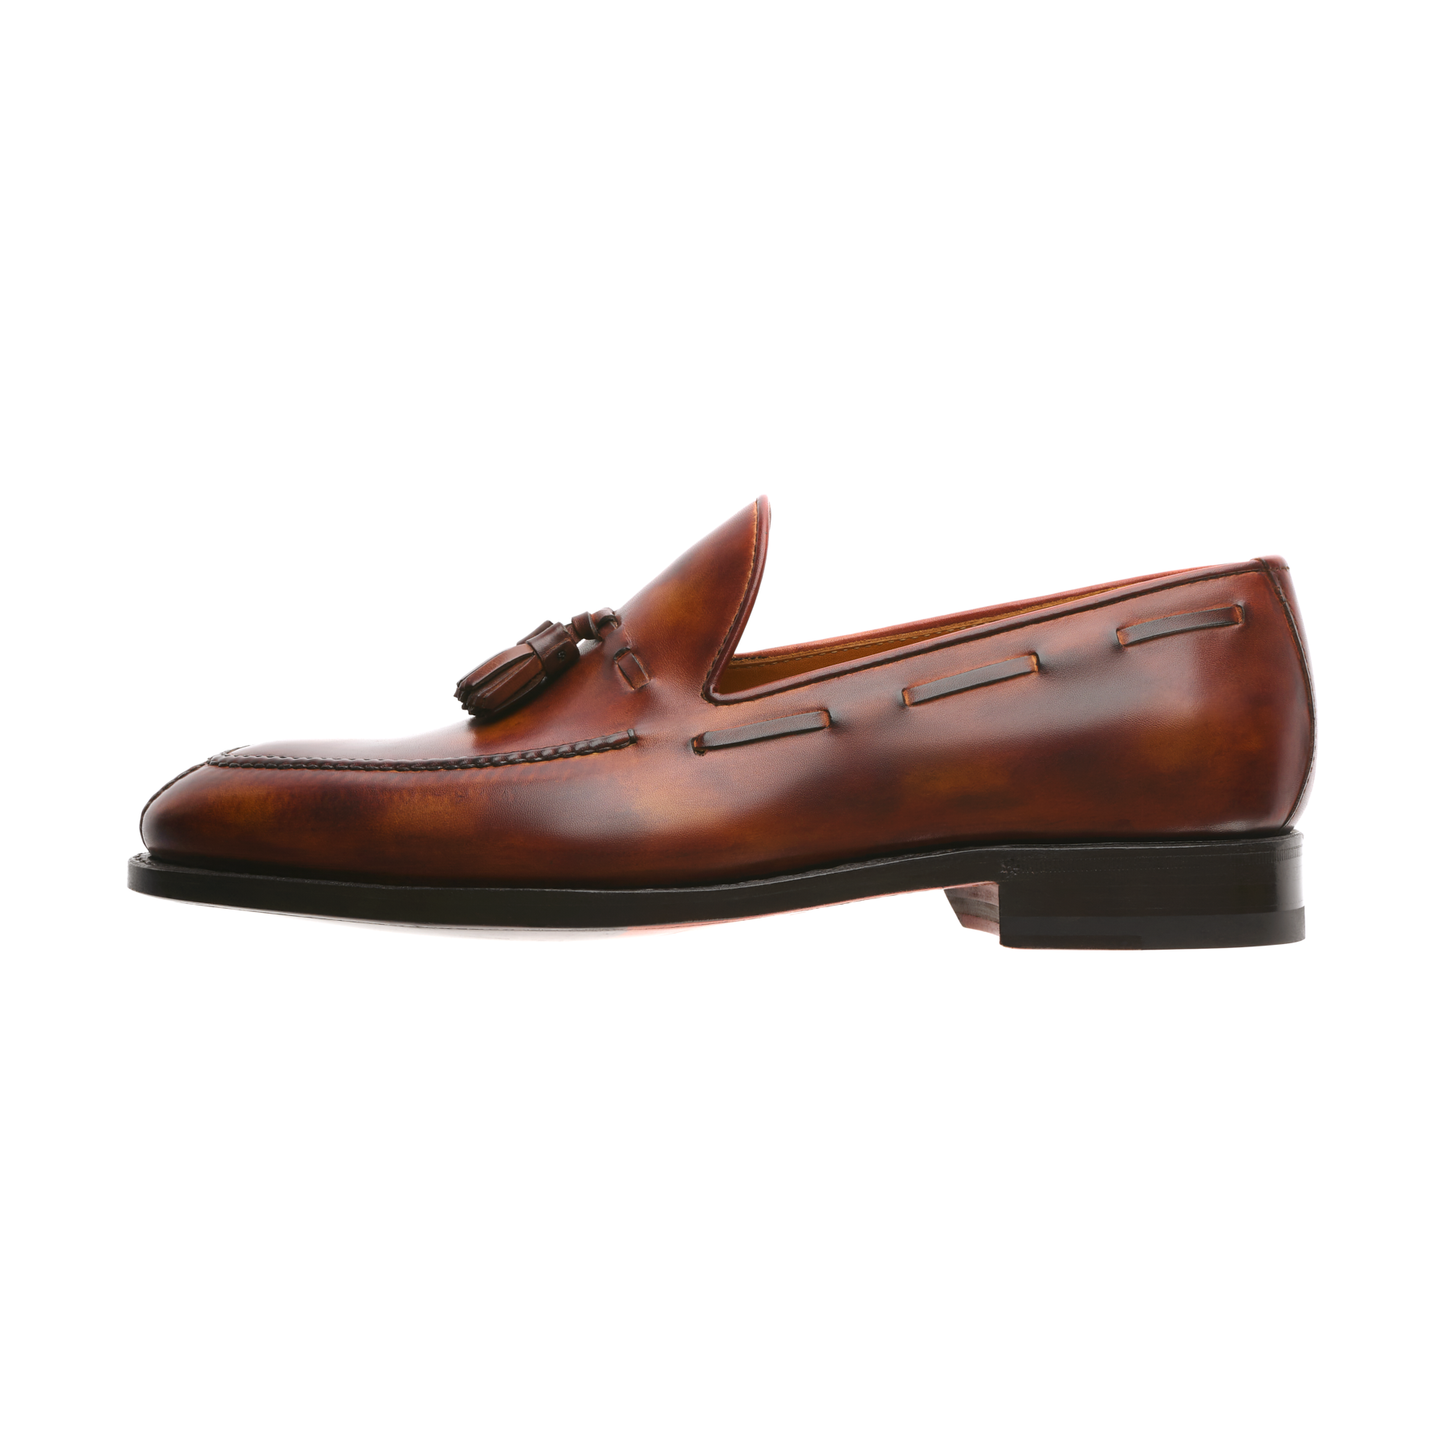 Bontoni "Conte Max" Classic Tassel Loafer with a Hand-Stitched Apron - SARTALE